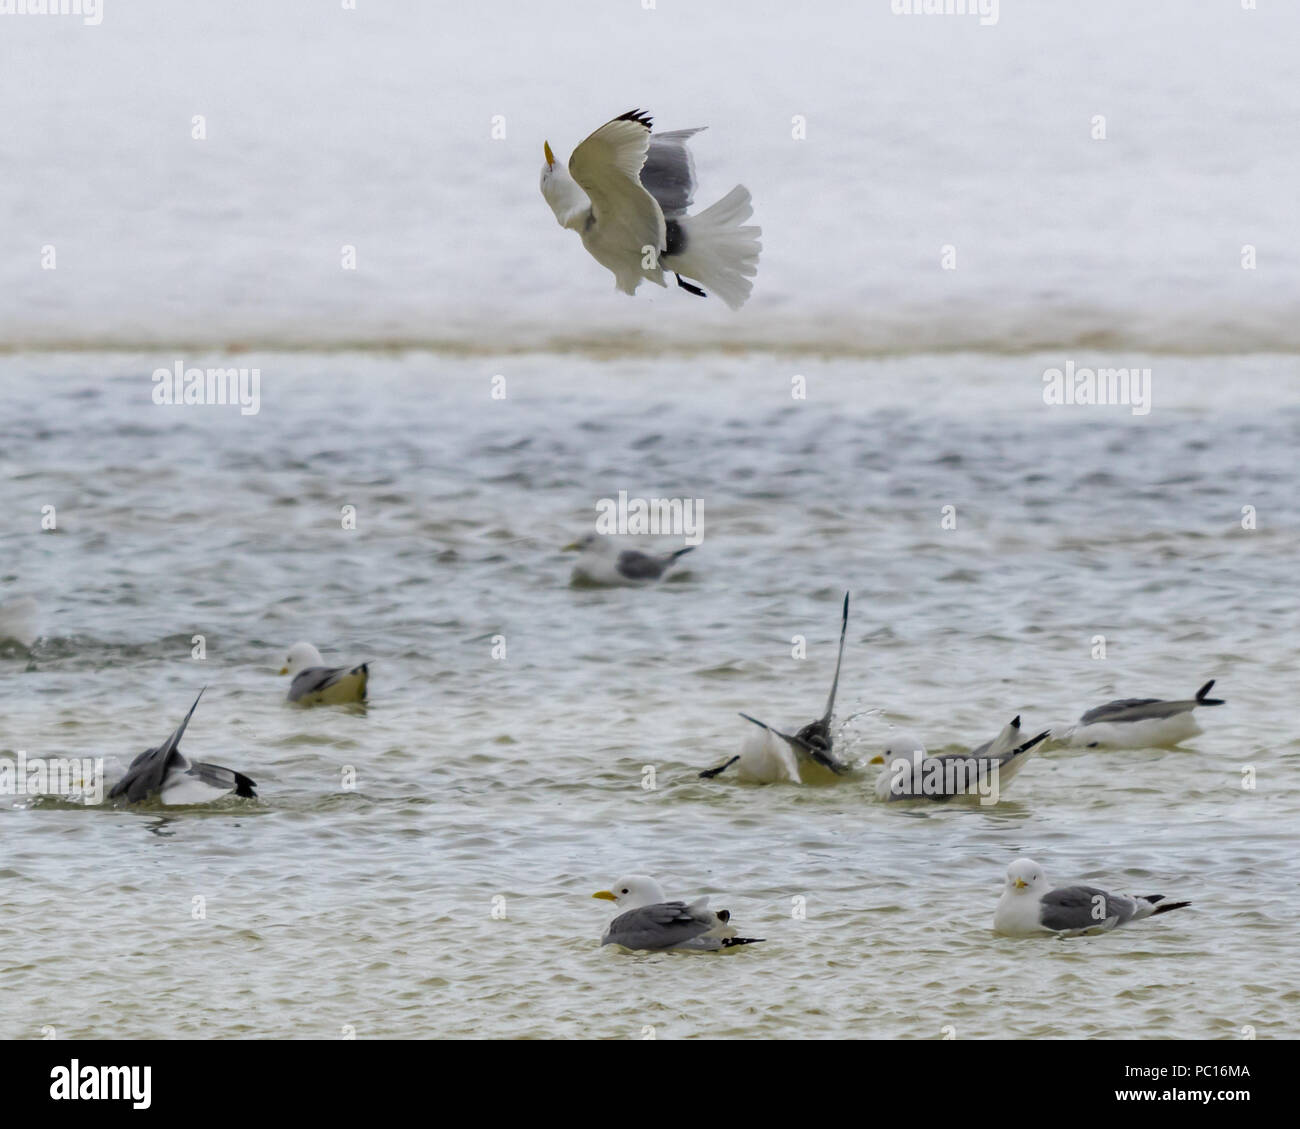 An acrobatic black legged kittiwake flying over members of its flock who are bathing in open water in Svalbard, Norway. Stock Photo